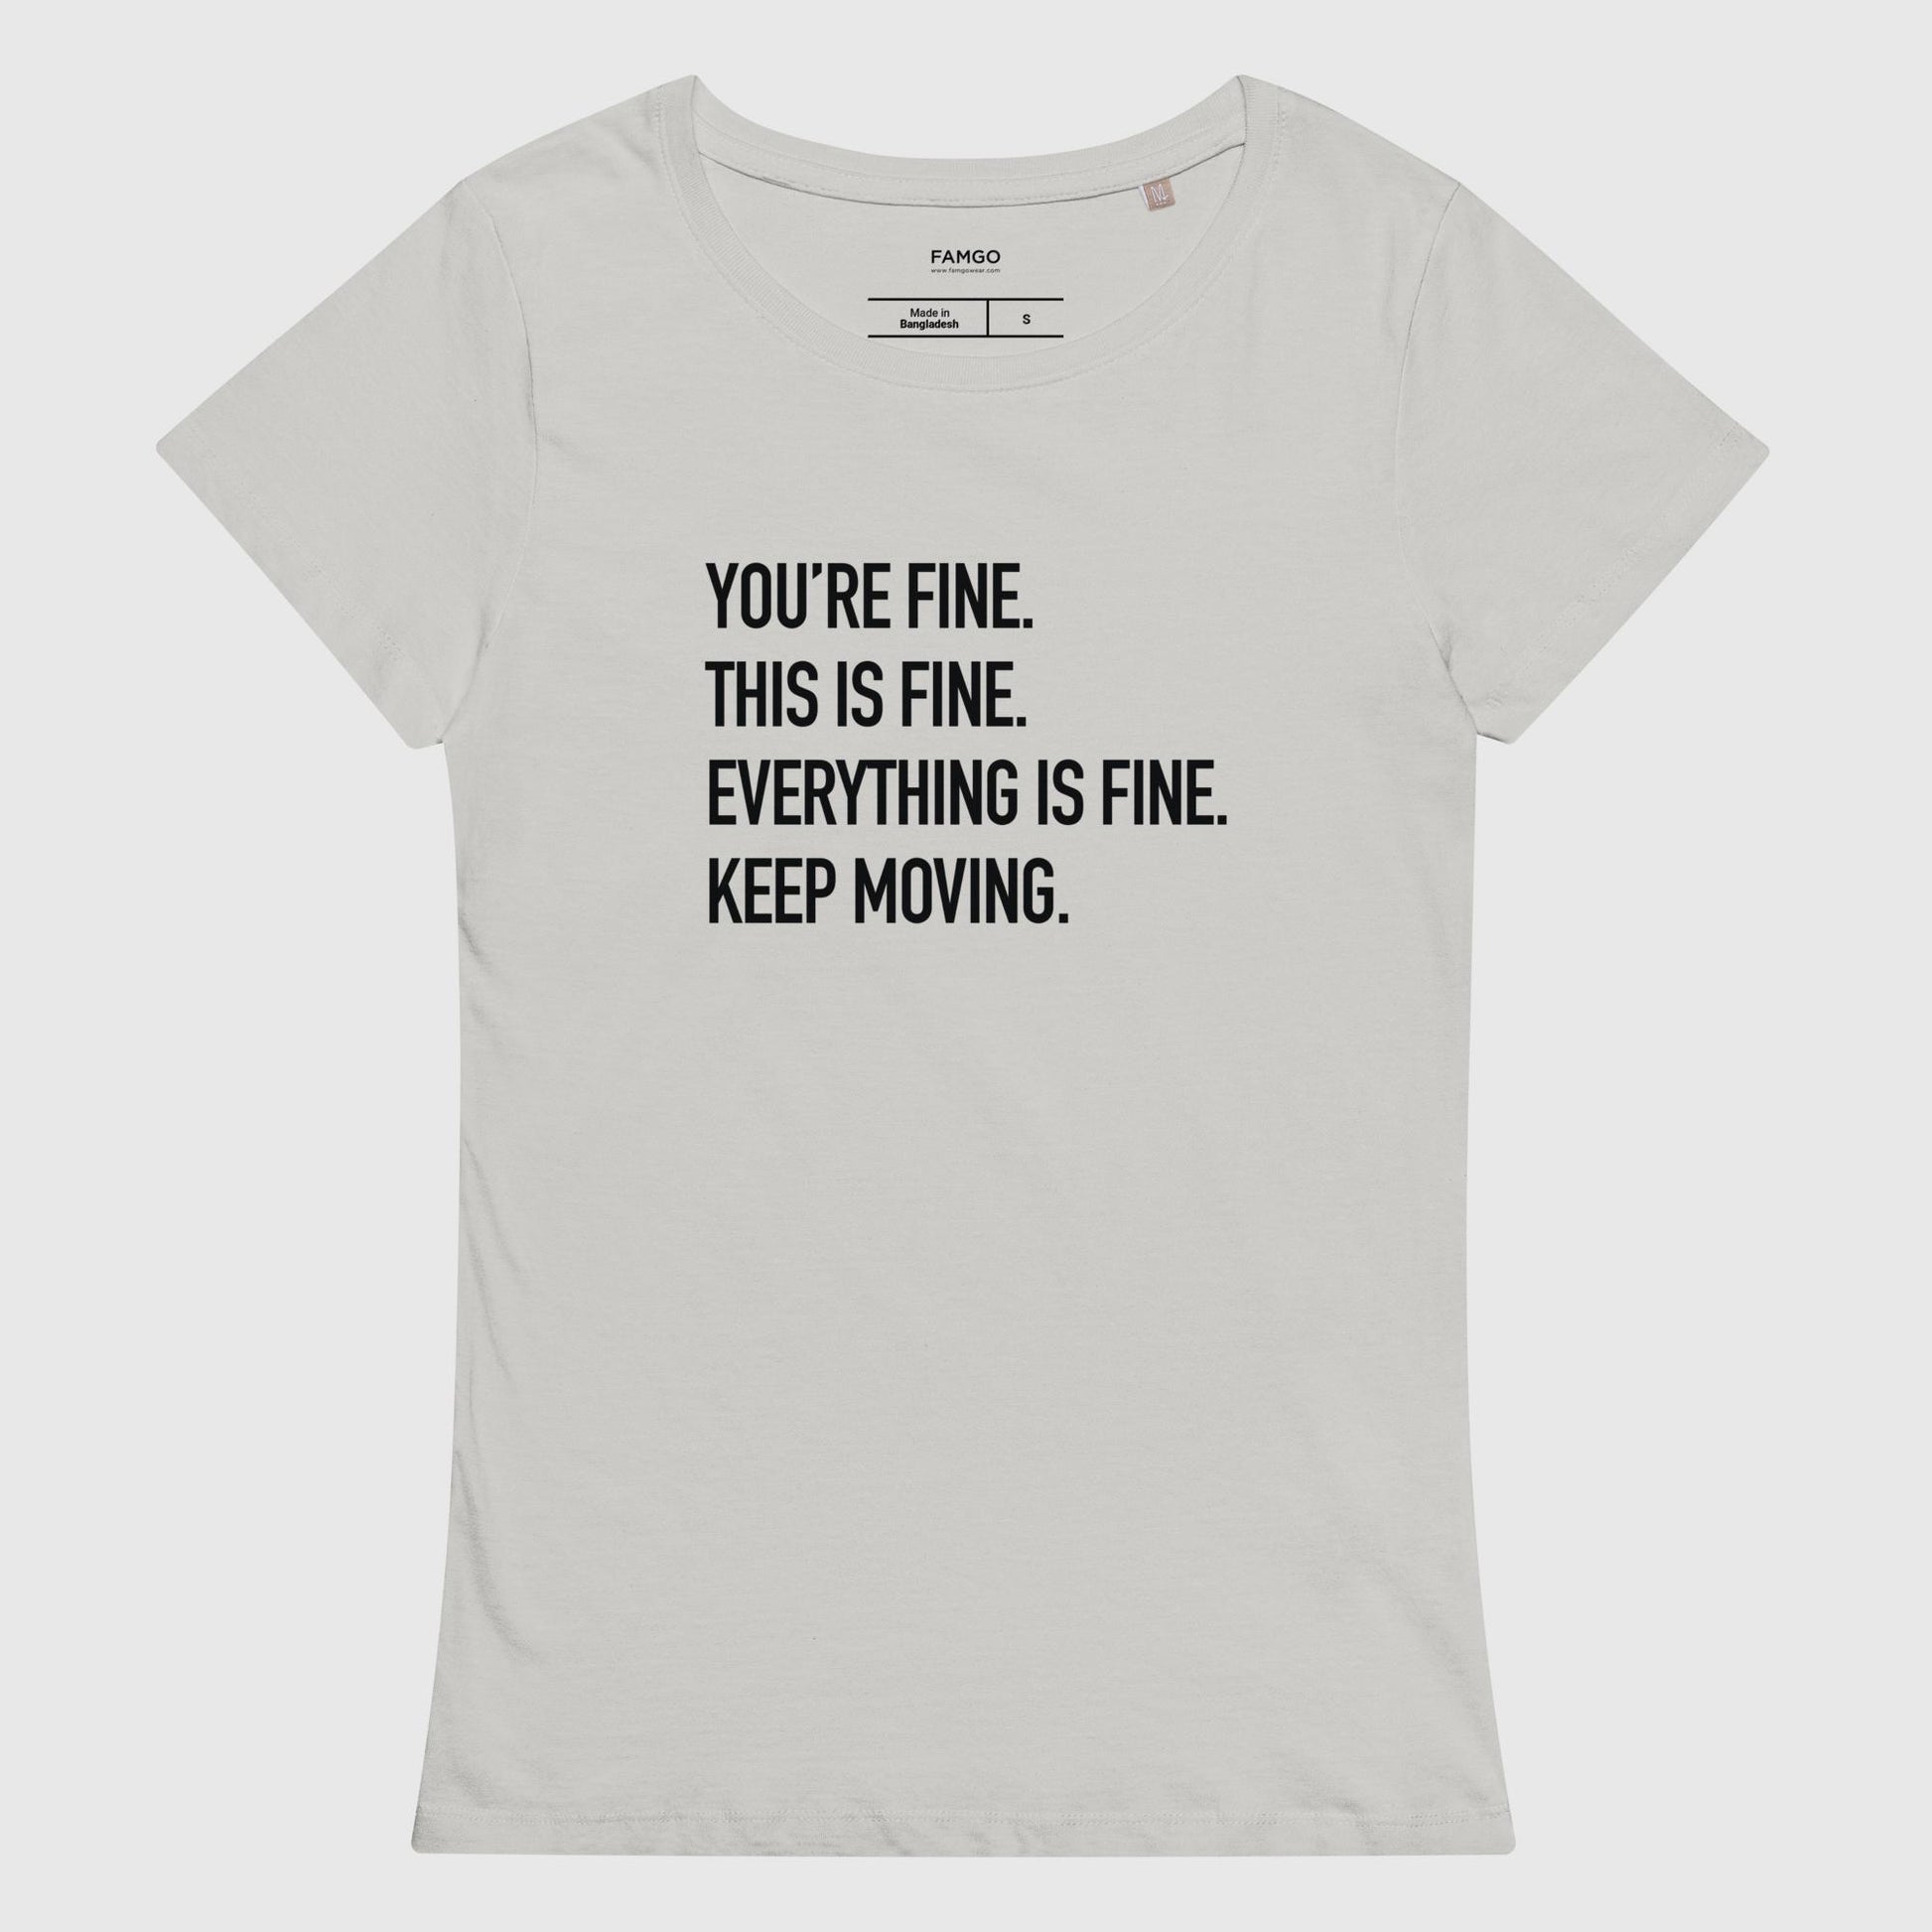 Women's pure gray organic cotton t-shirt that features Courtney Dauwalter's mantra, "You're fine. This is fine. Everything is fine. Keep moving."